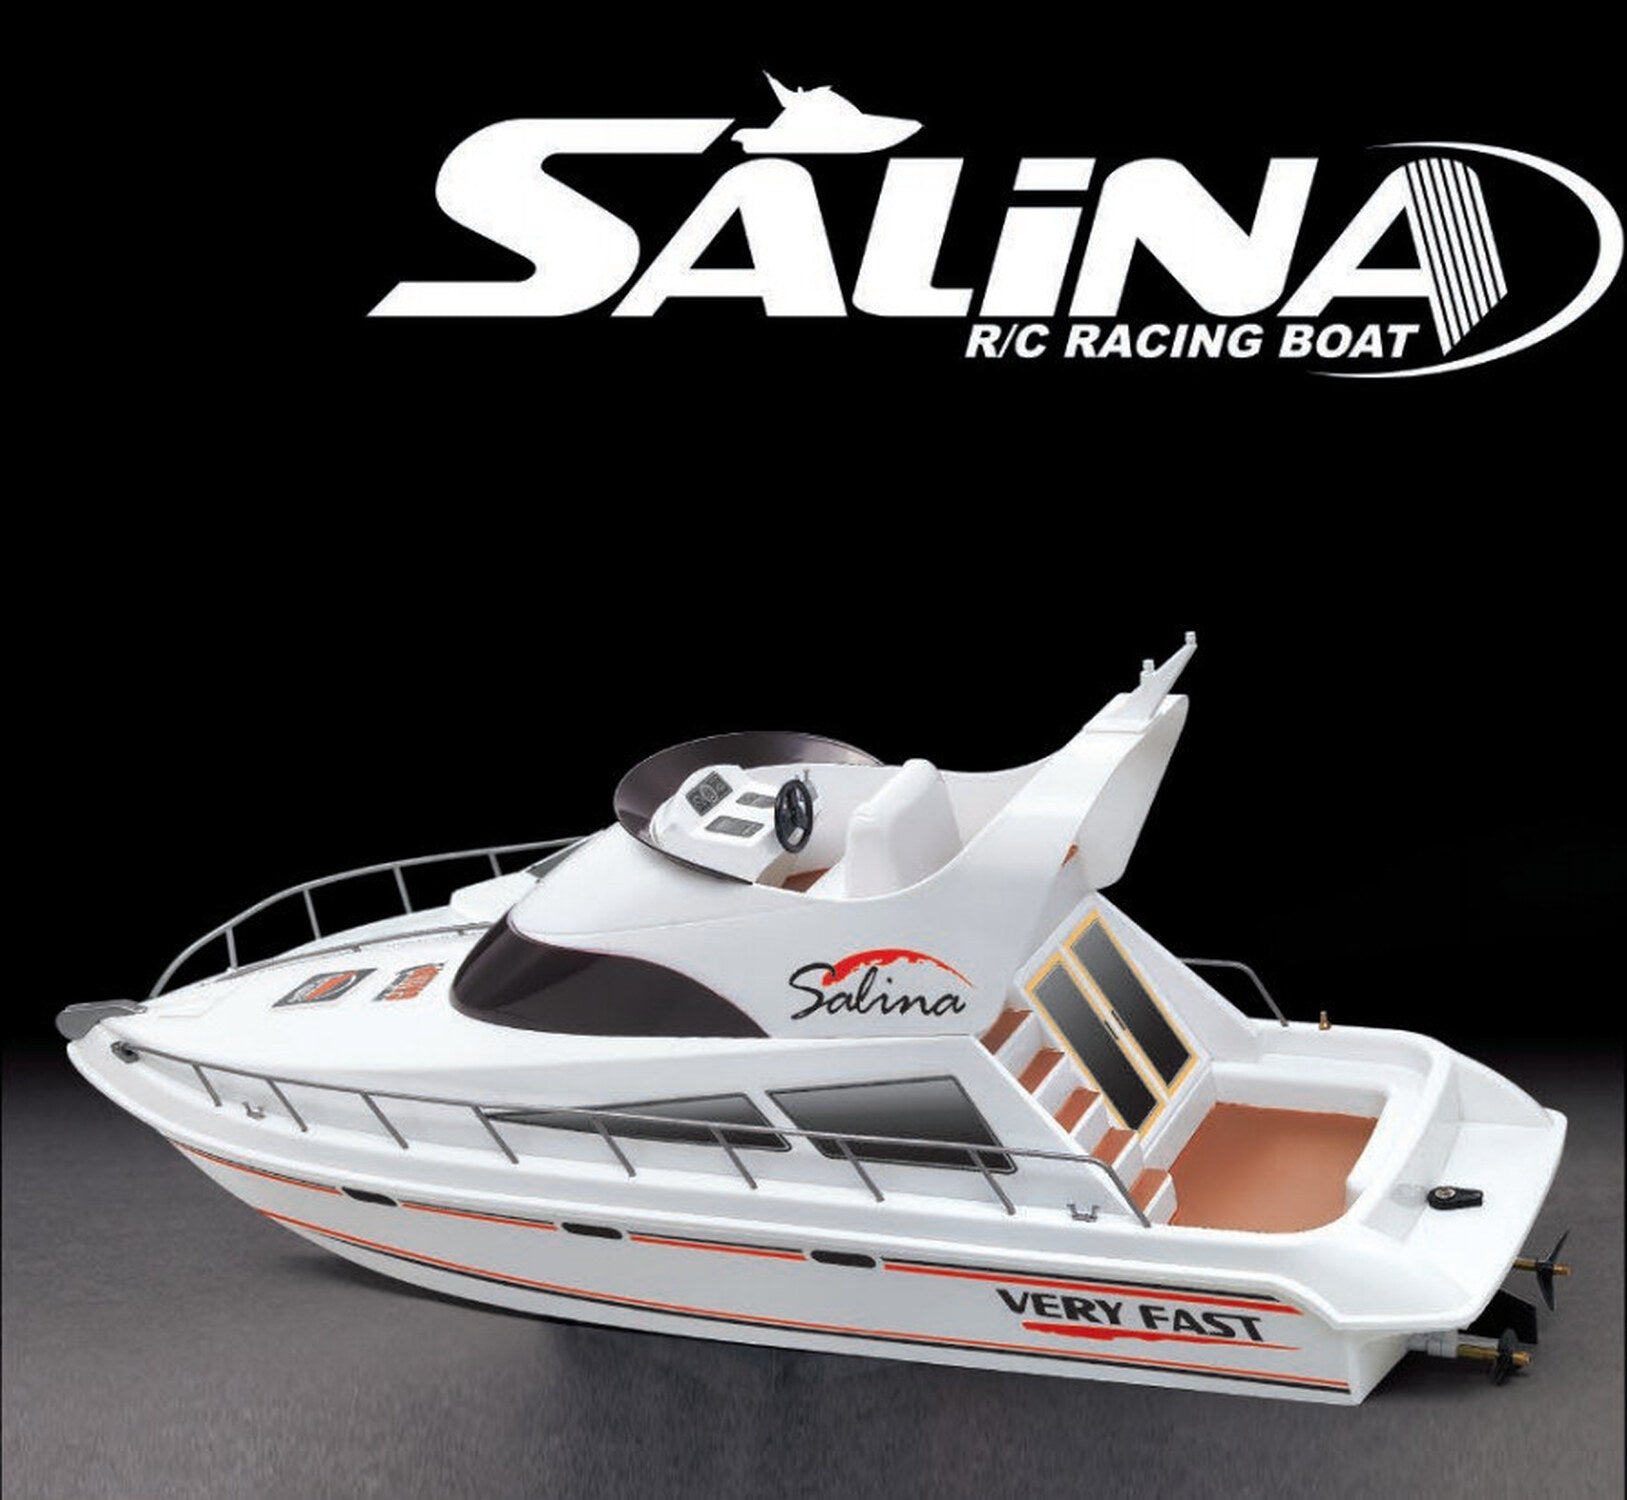 TPFLiving RC boat Yacht Atlantic white - RC boat - remote controlled w –  Traumpreisfabrik